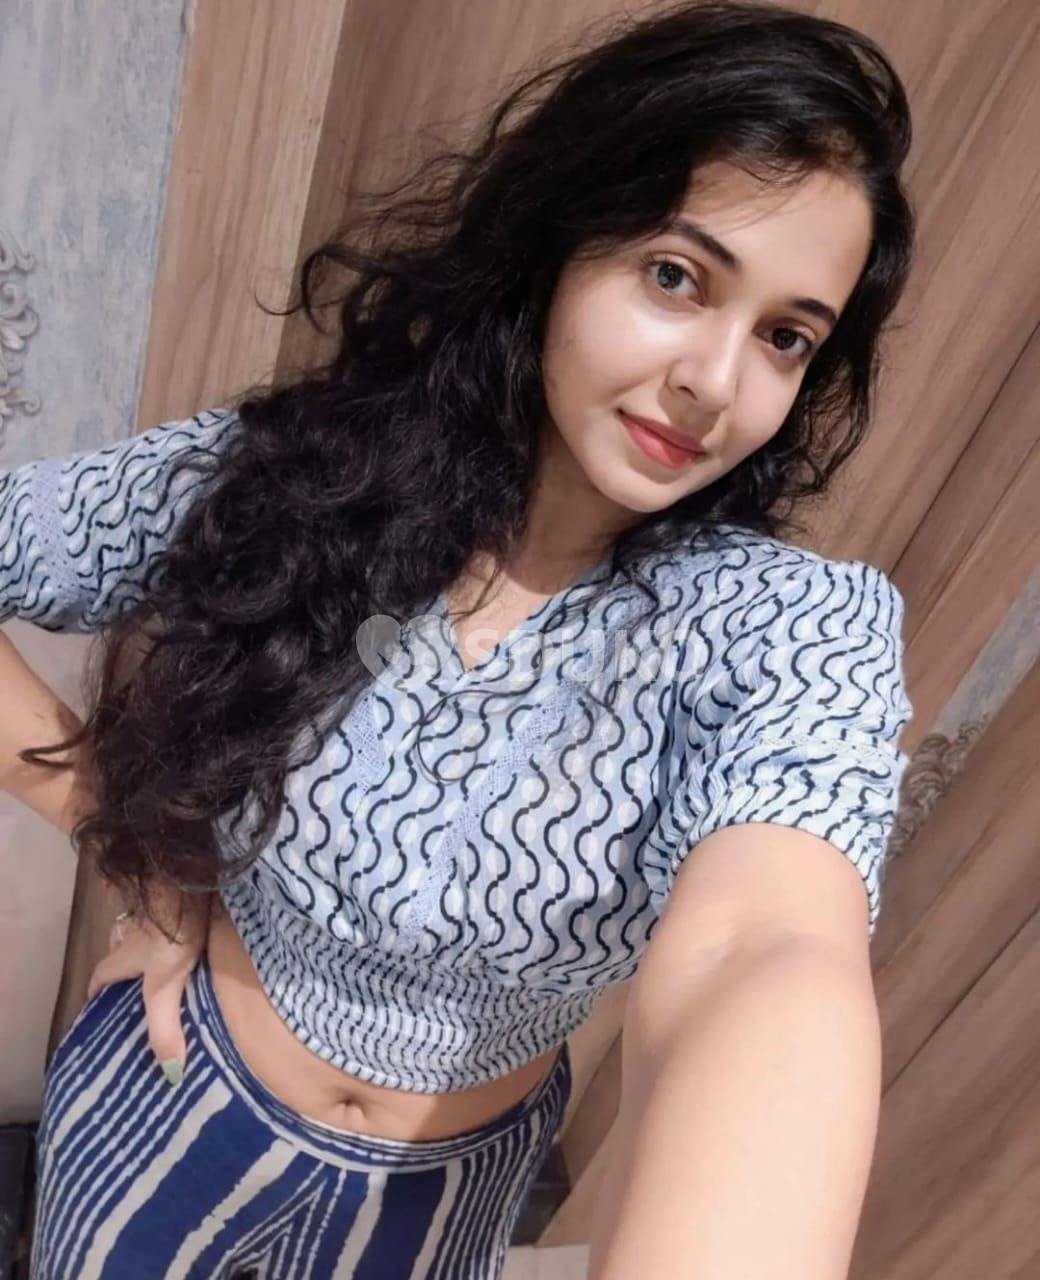 PALANPUR 👈 VIP✔️INDEPENDENT💯 COLLEGE GIRLS AVAILABLE FULL ENJOY ONE TIME CONTACT ME AND FULL MASTI